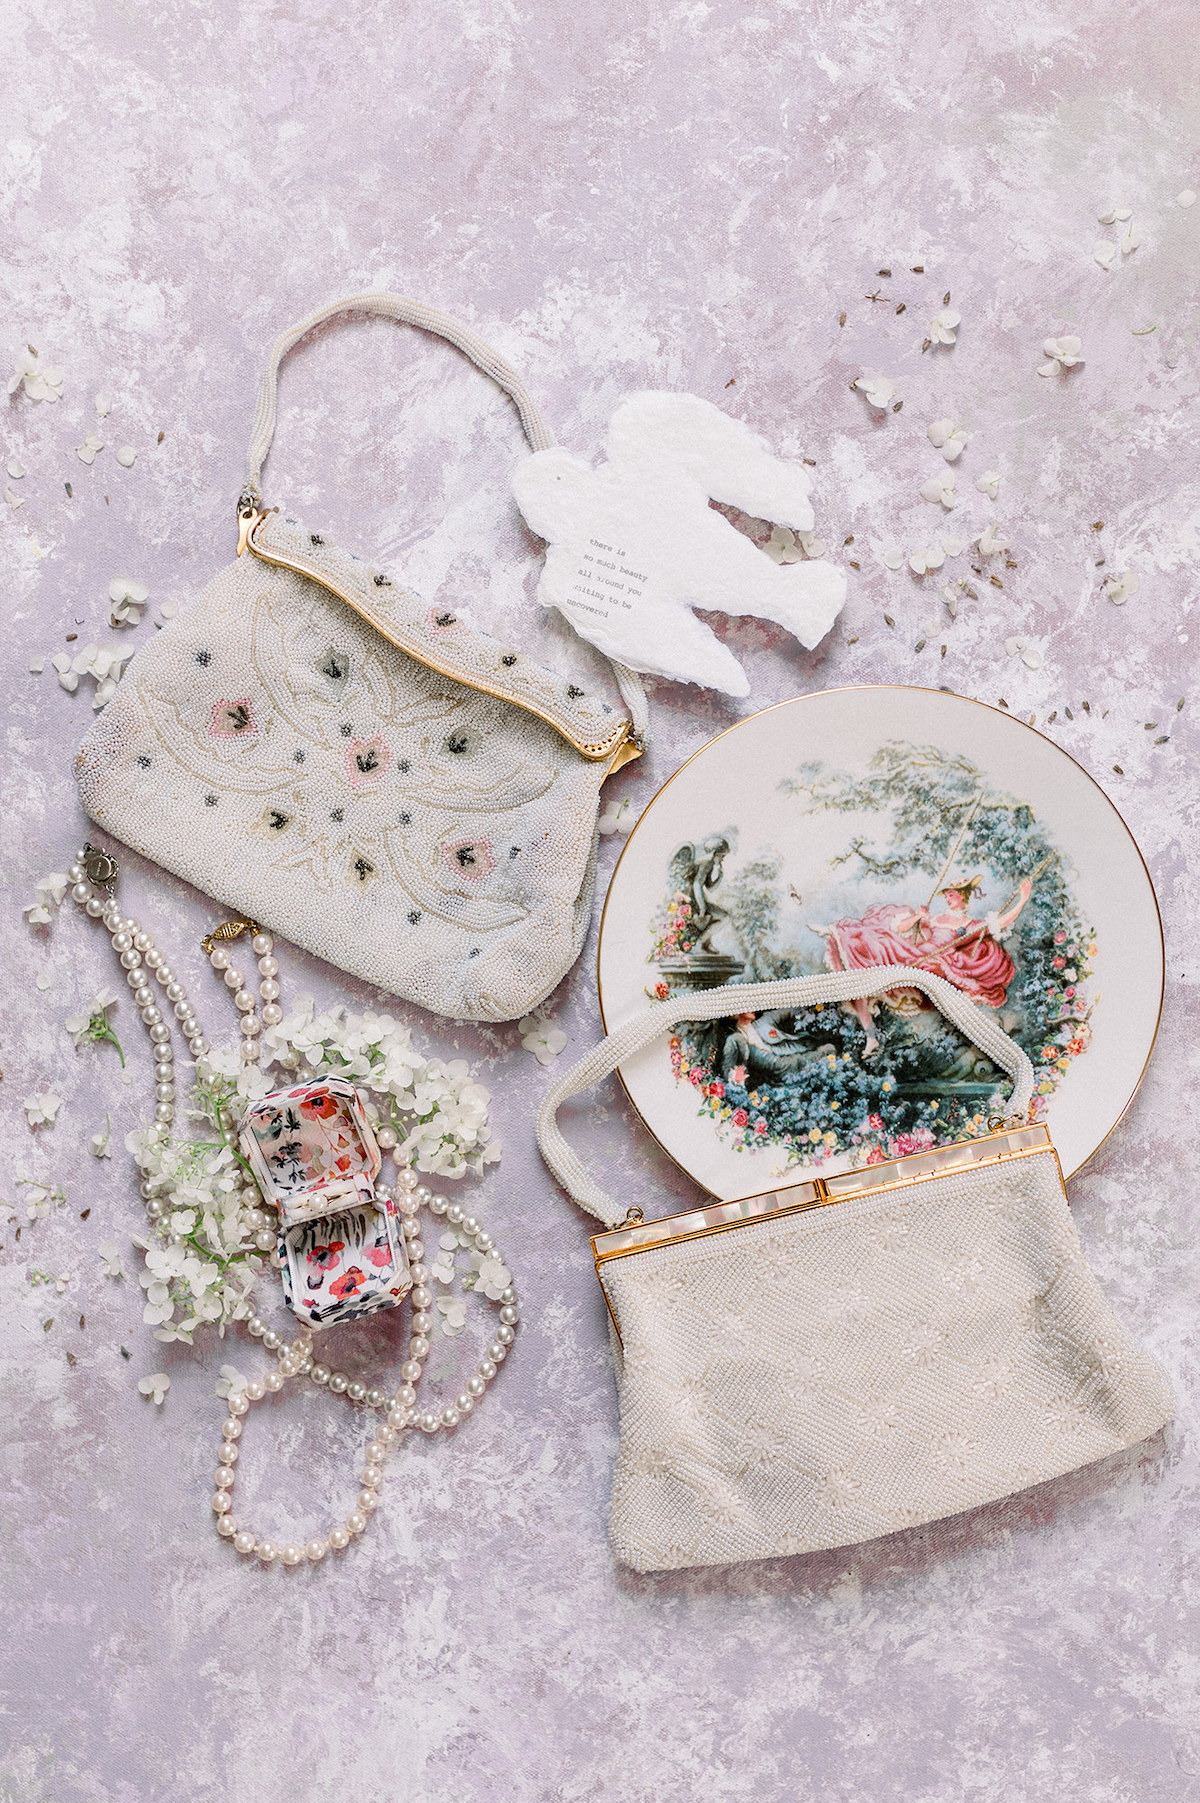 Close-up of intricate details showcased on a hand-painted backdrop, including vintage jewelry and delicate floral accents.